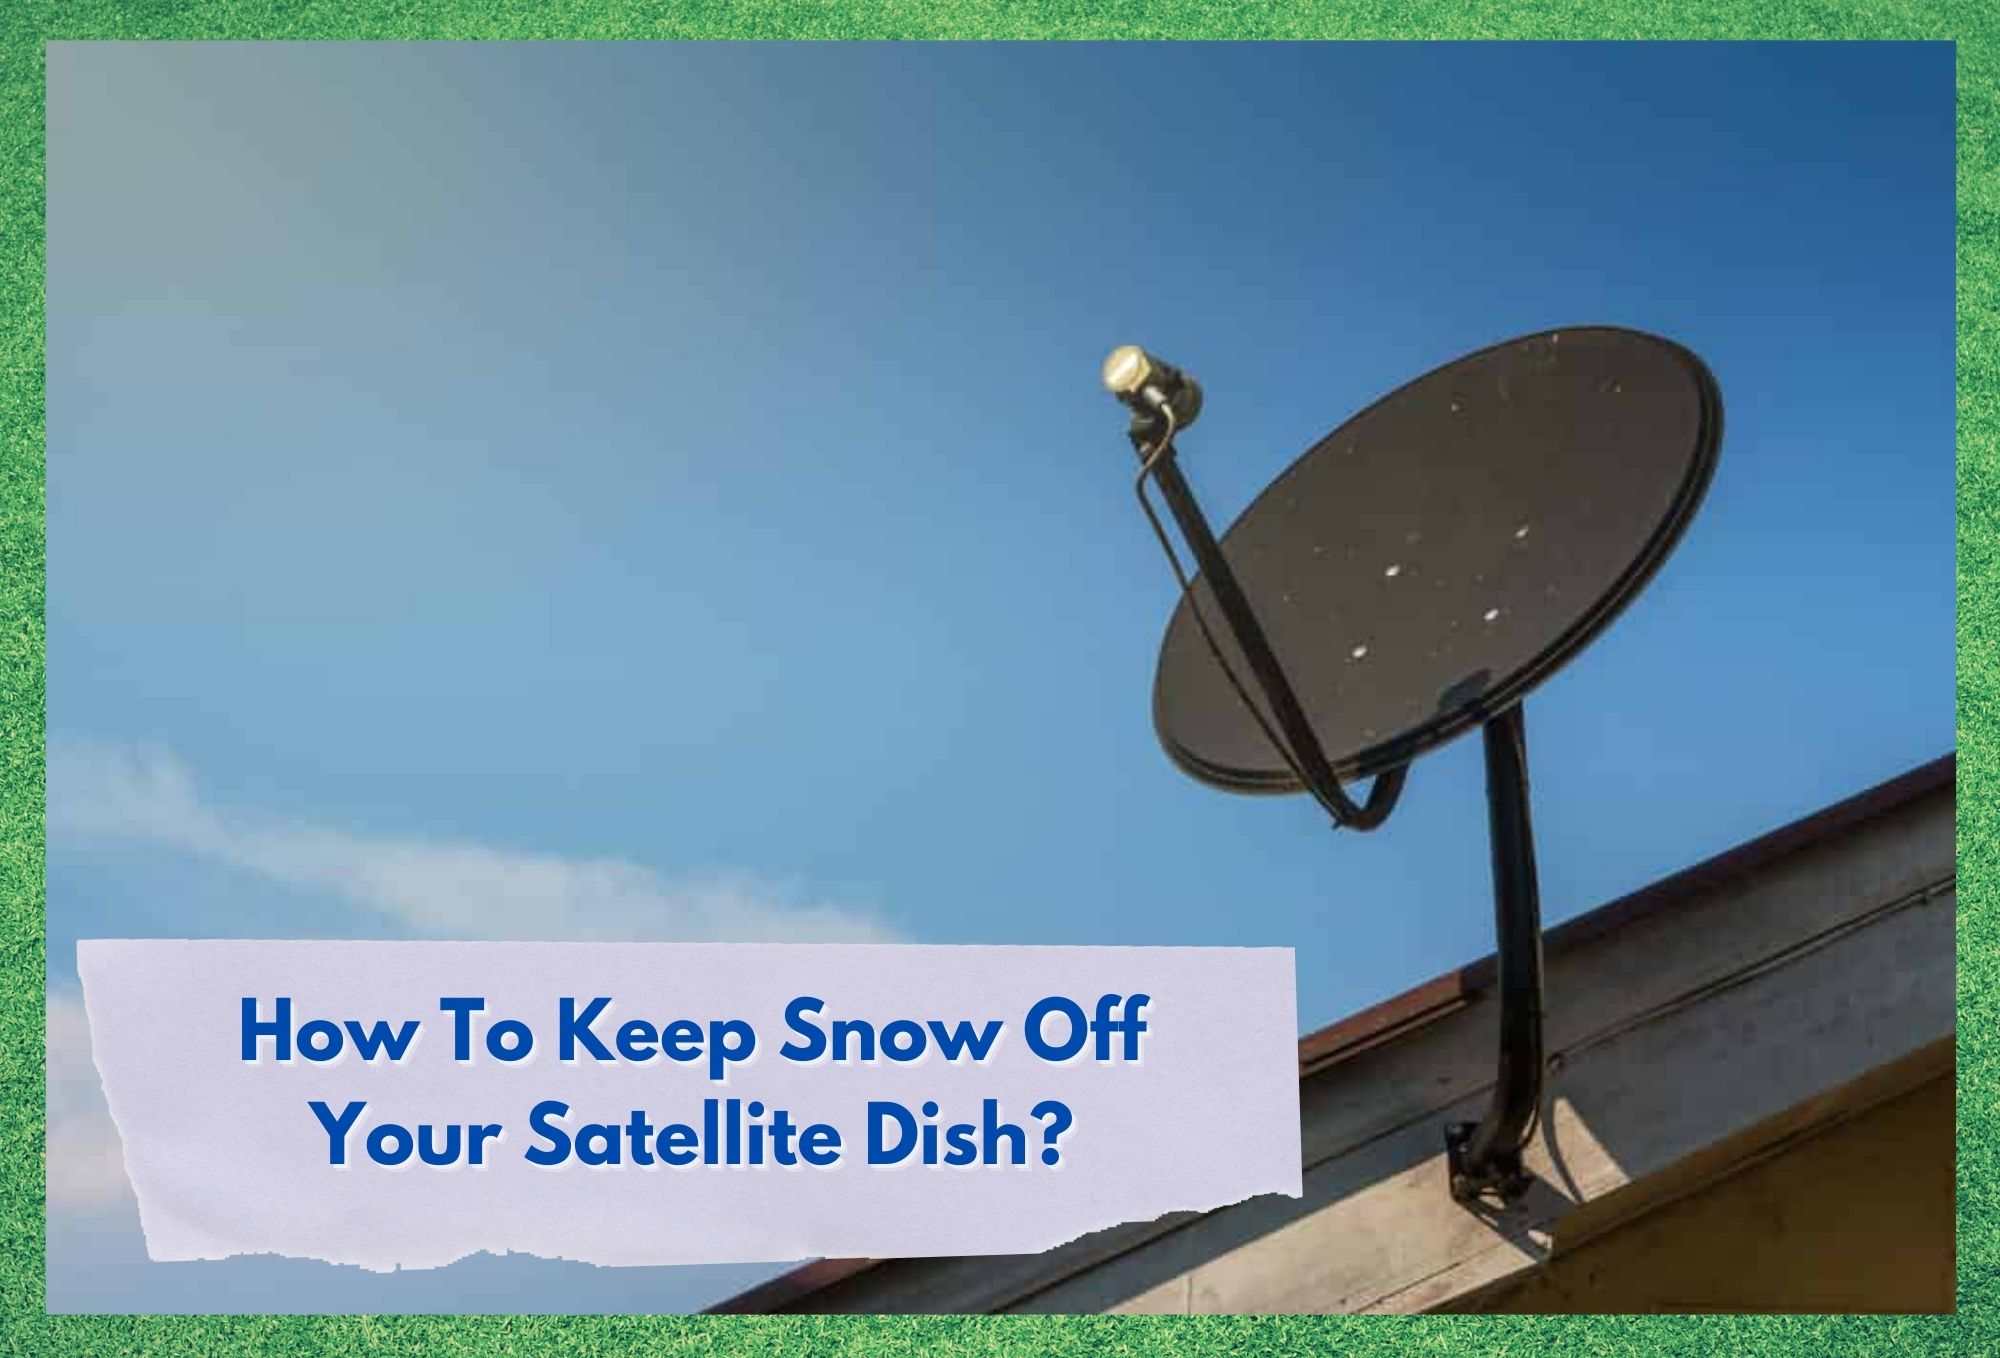 Keep Snow Off Your Satellite Dish